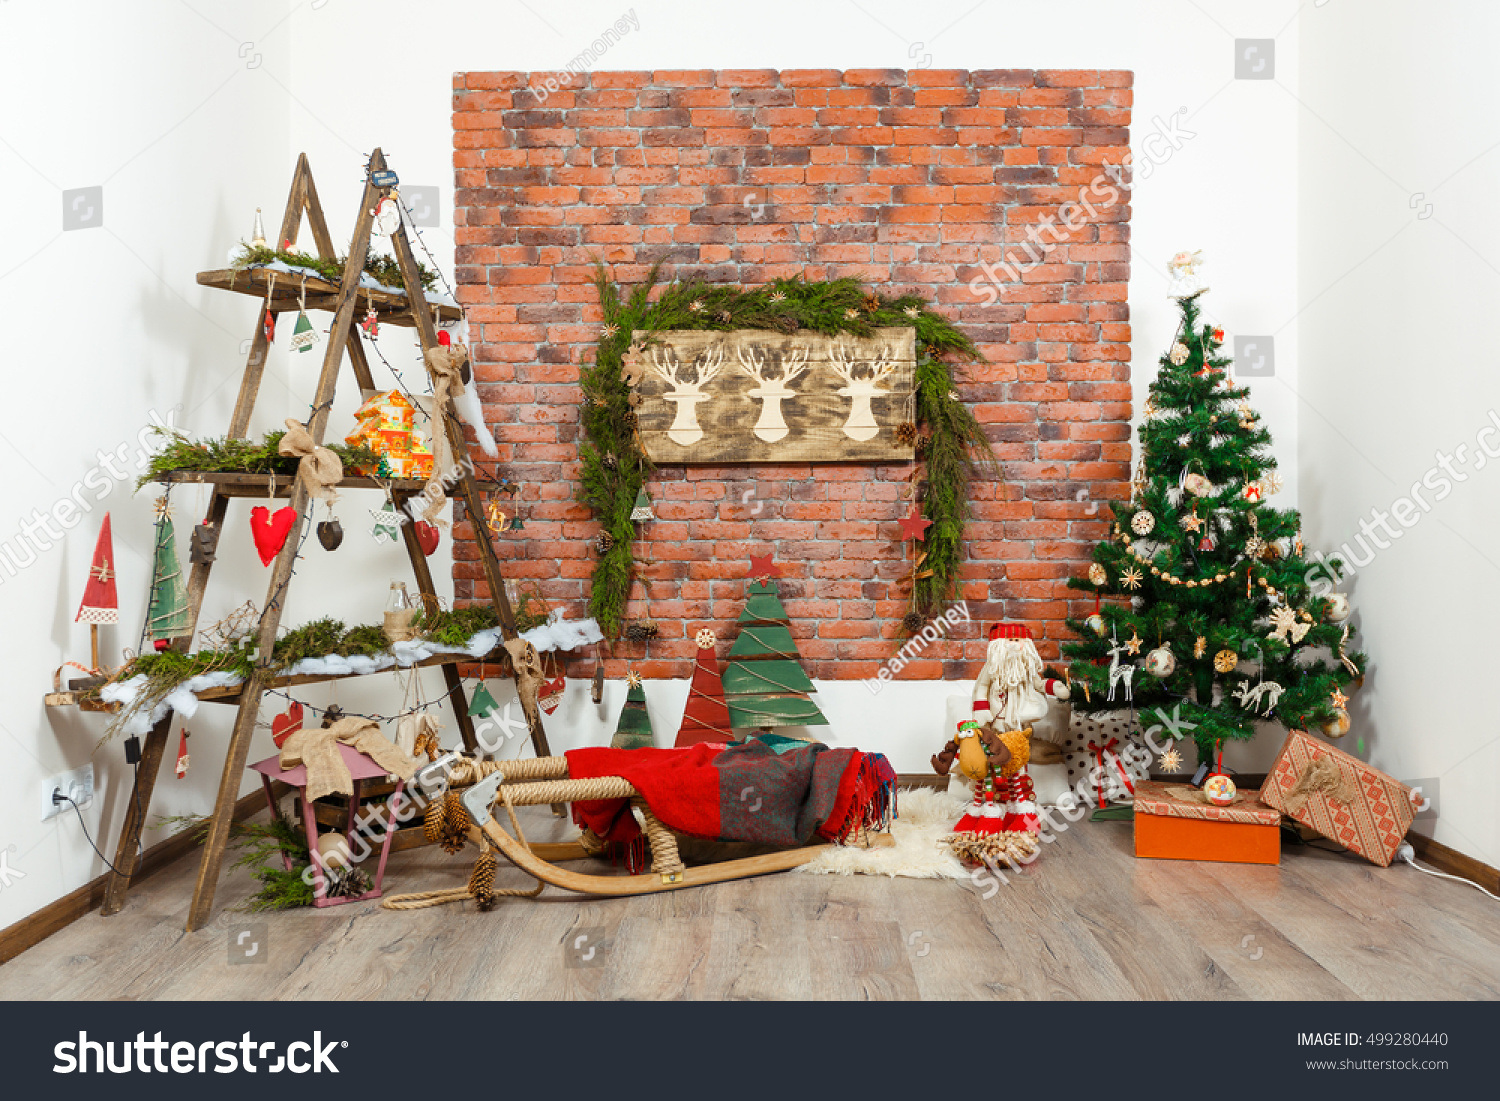 Christmas Interior Room Filled Natural Homemade Stock Photo Edit Now 499280440